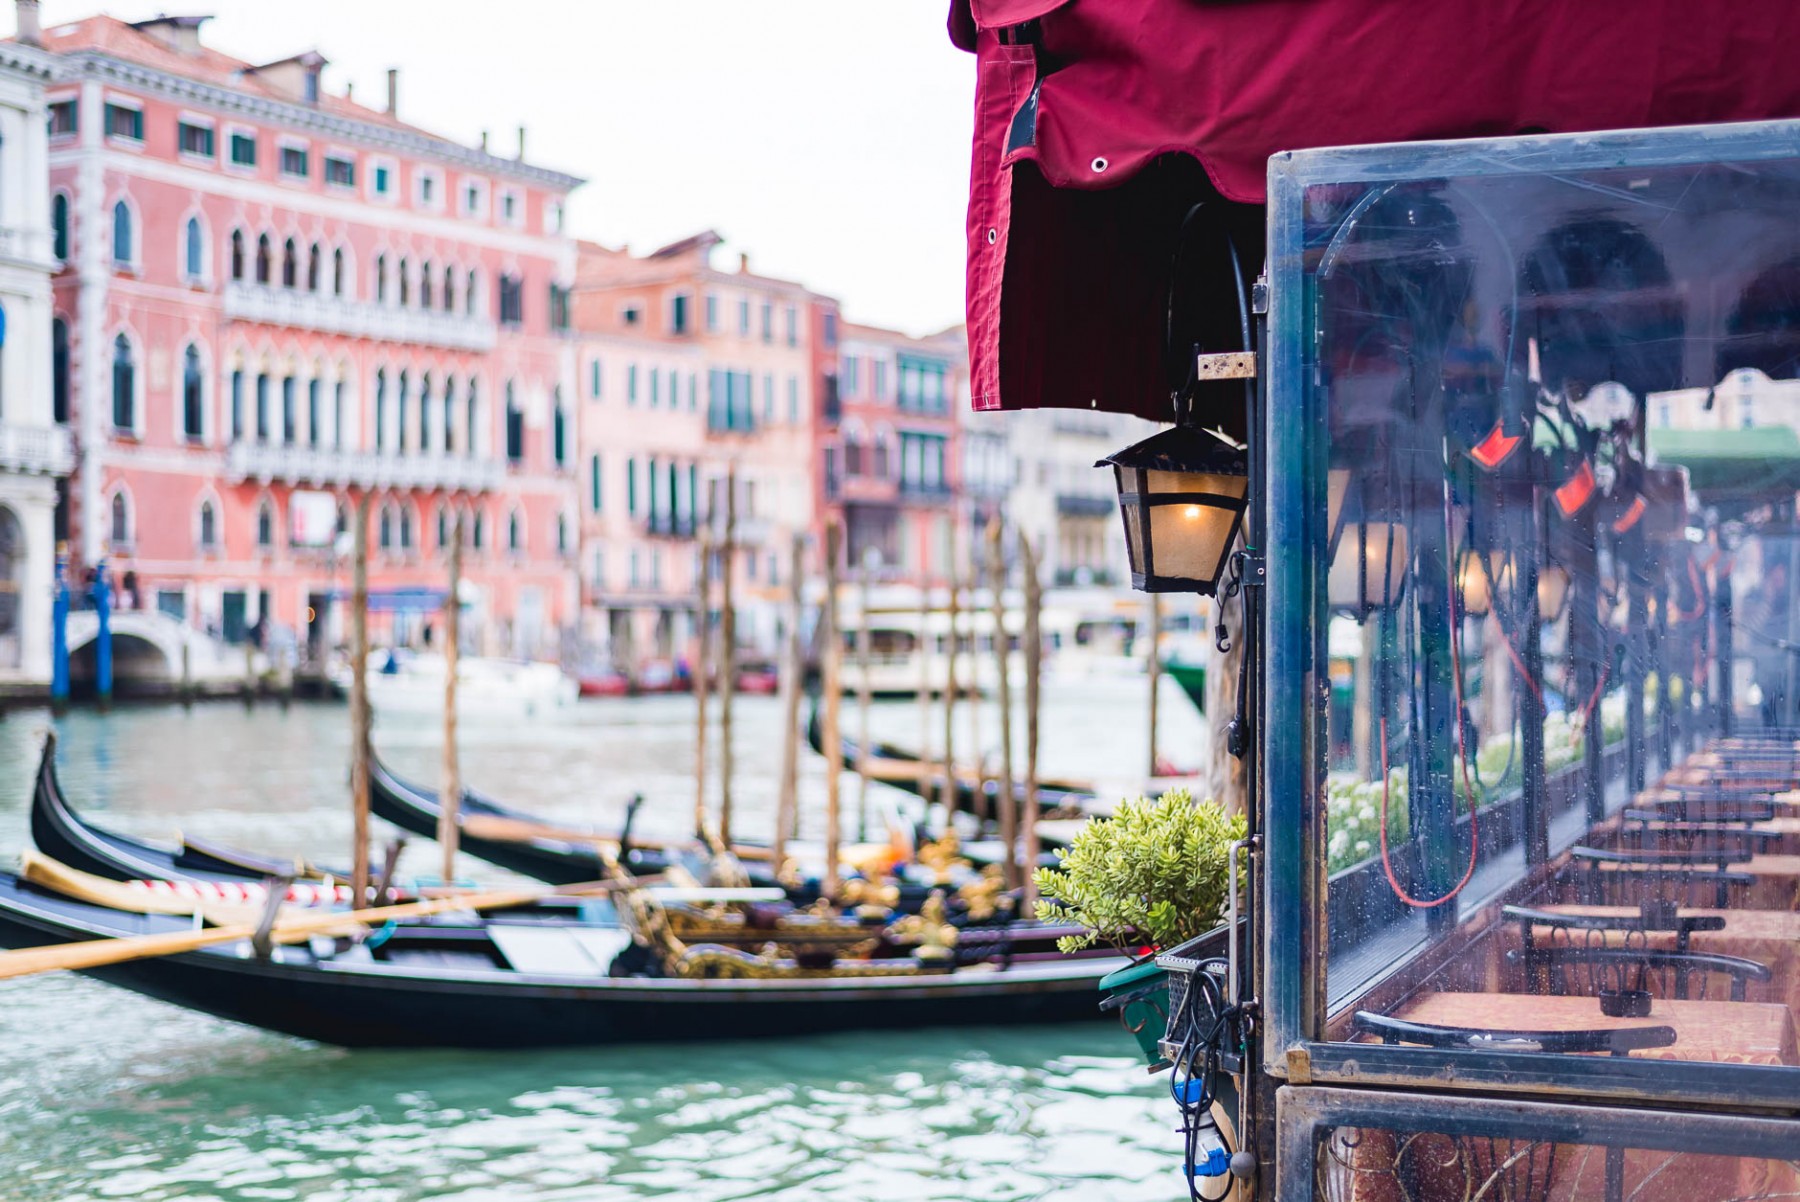 Travel tips for Venice, Italy 